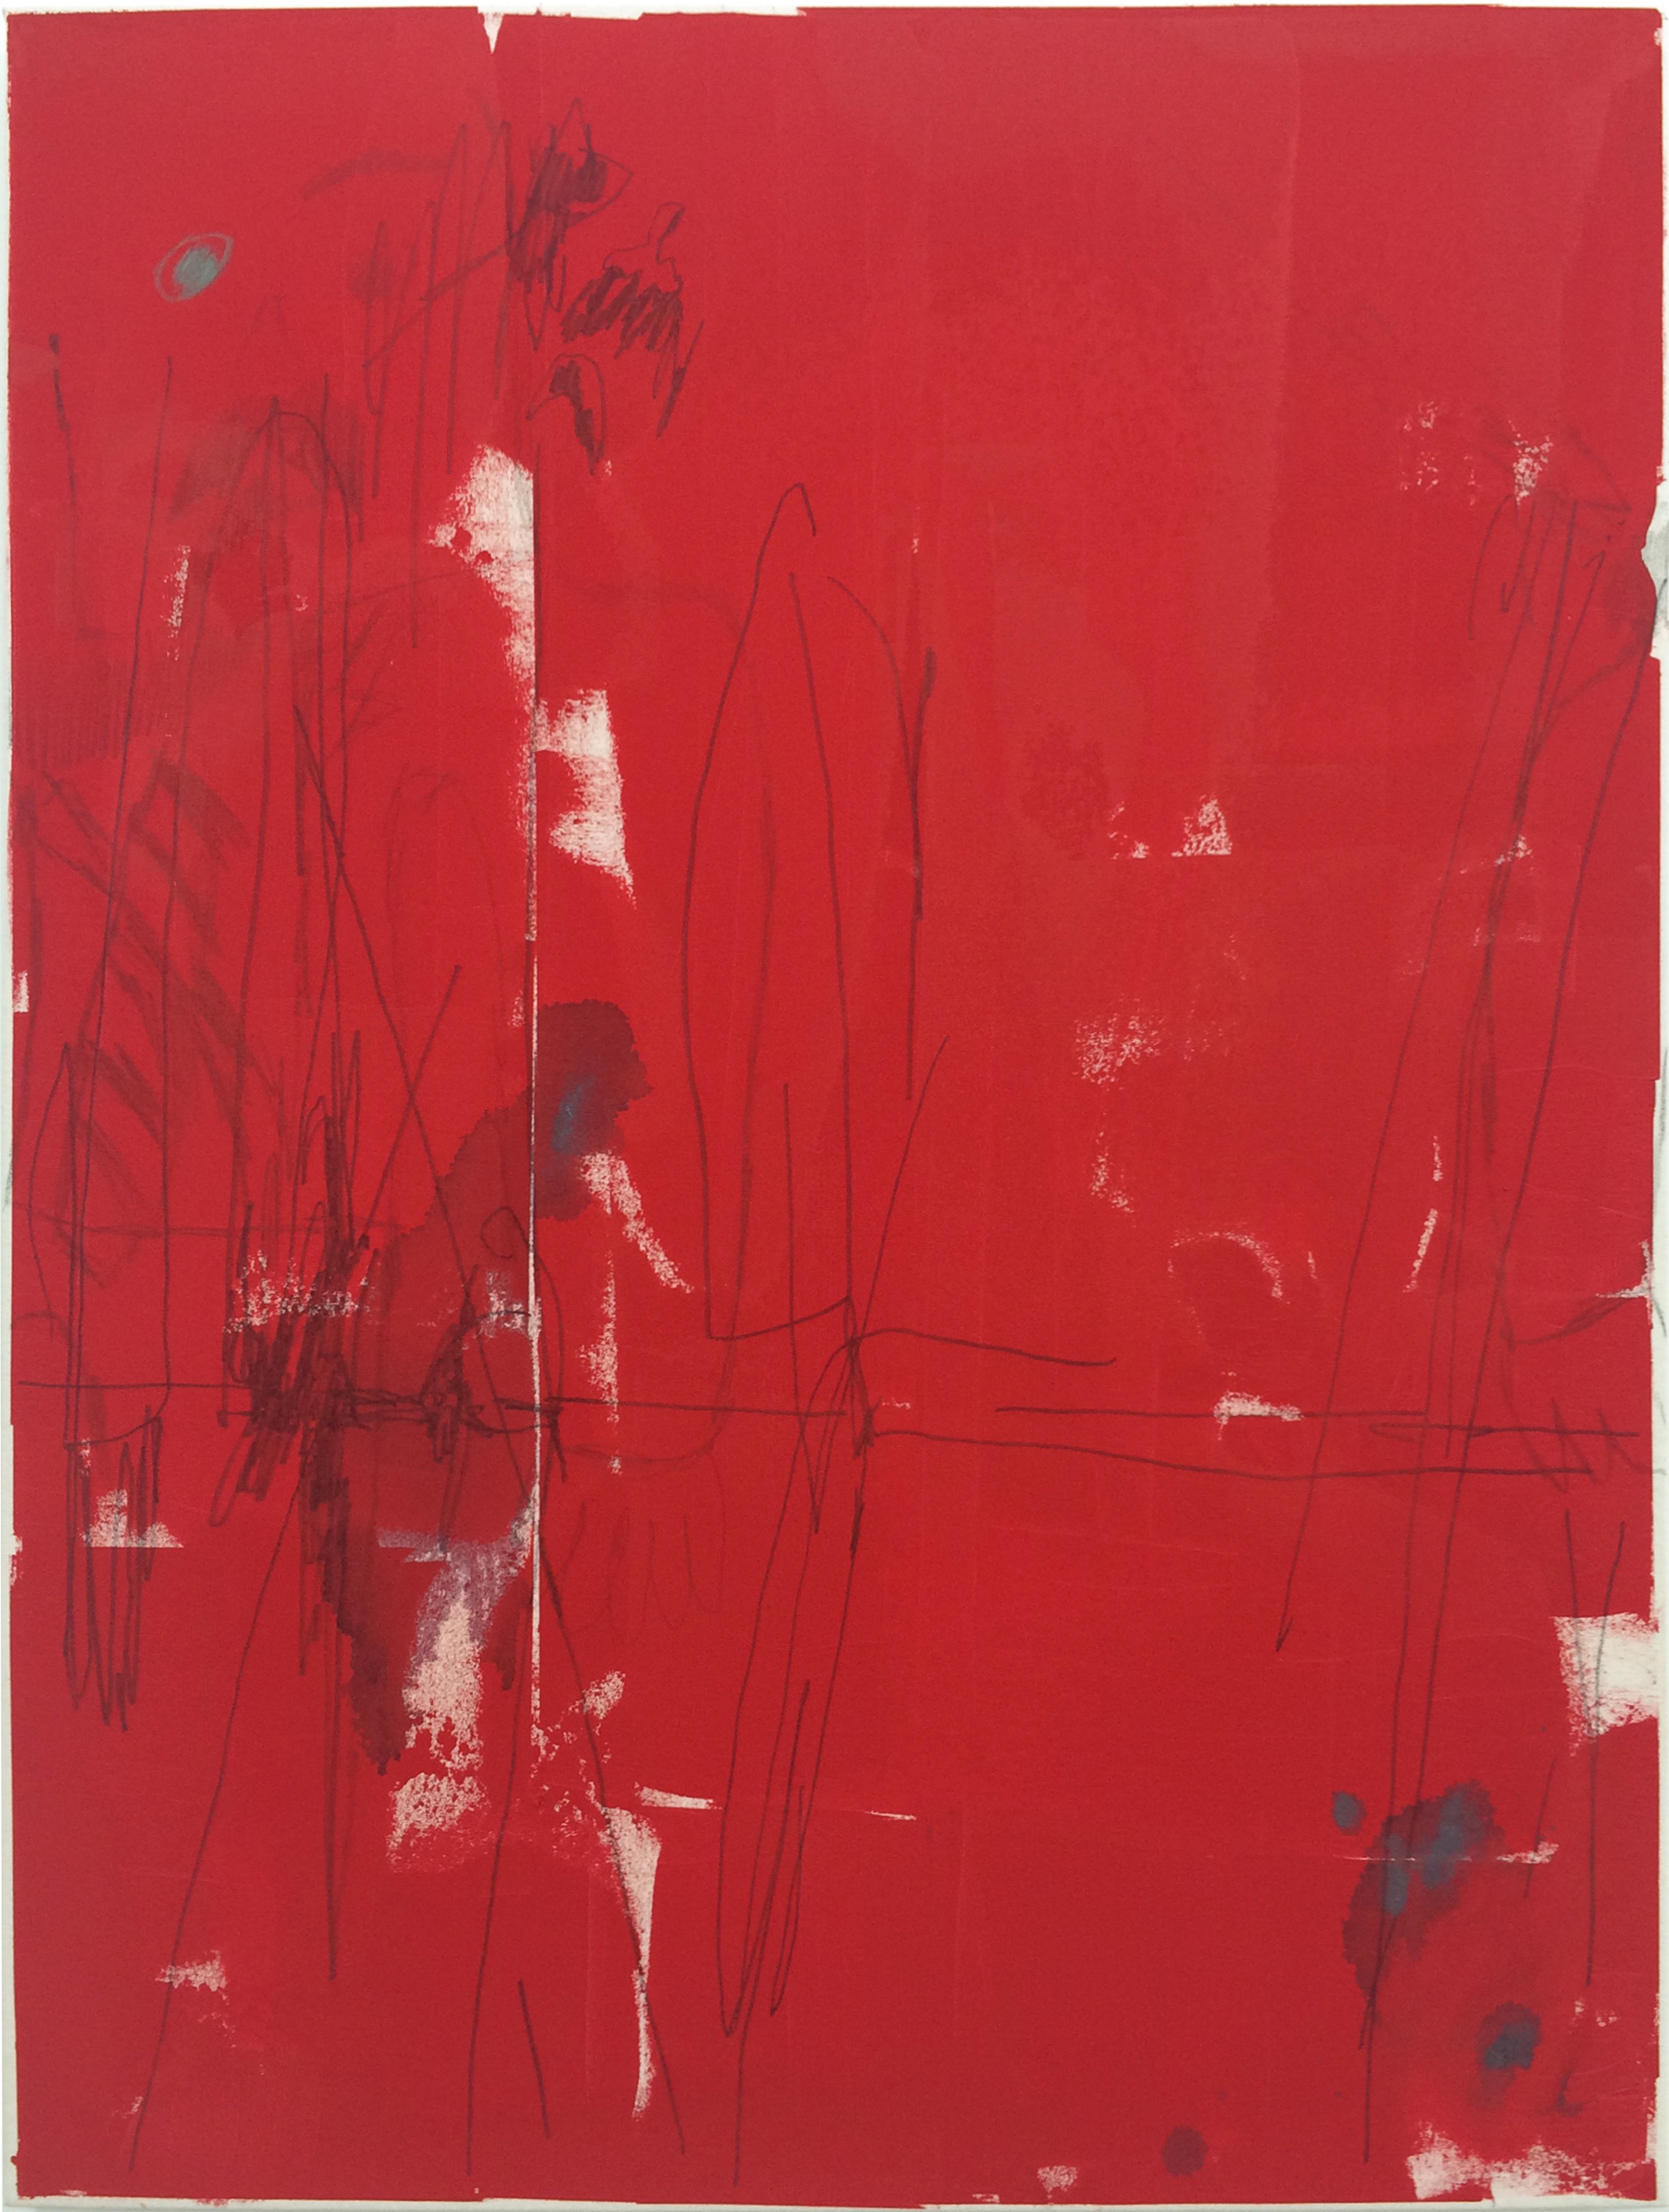   TED GAHL   Commuters (Strangers' Hands Touching, Red) , 2015, oil, acrylic, graphite and colord pencil on canvas, 48" x 36" 